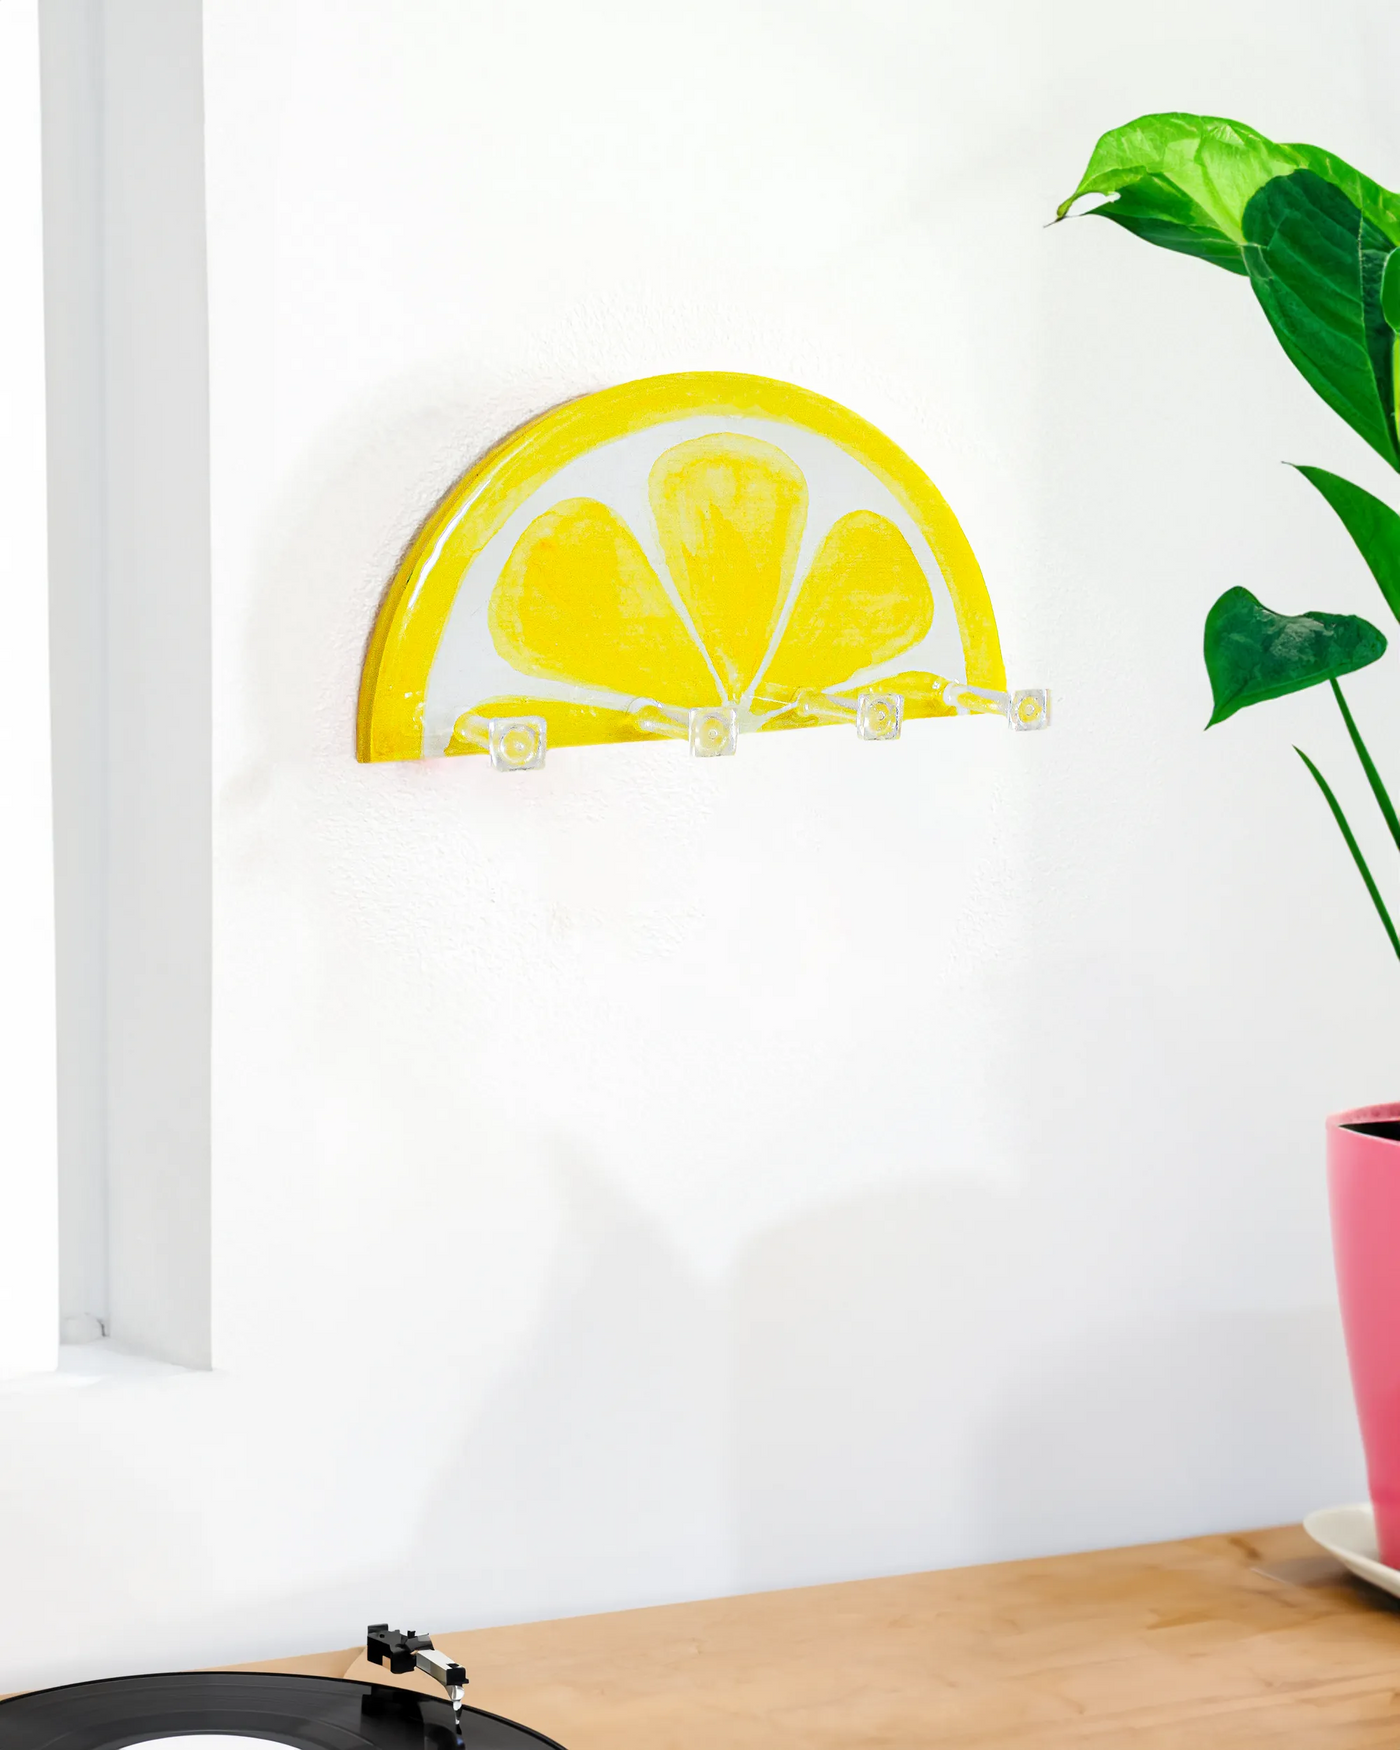 Lemon-themed key holder made of wood and resin, featuring four durable hooks for keys and small accessories.